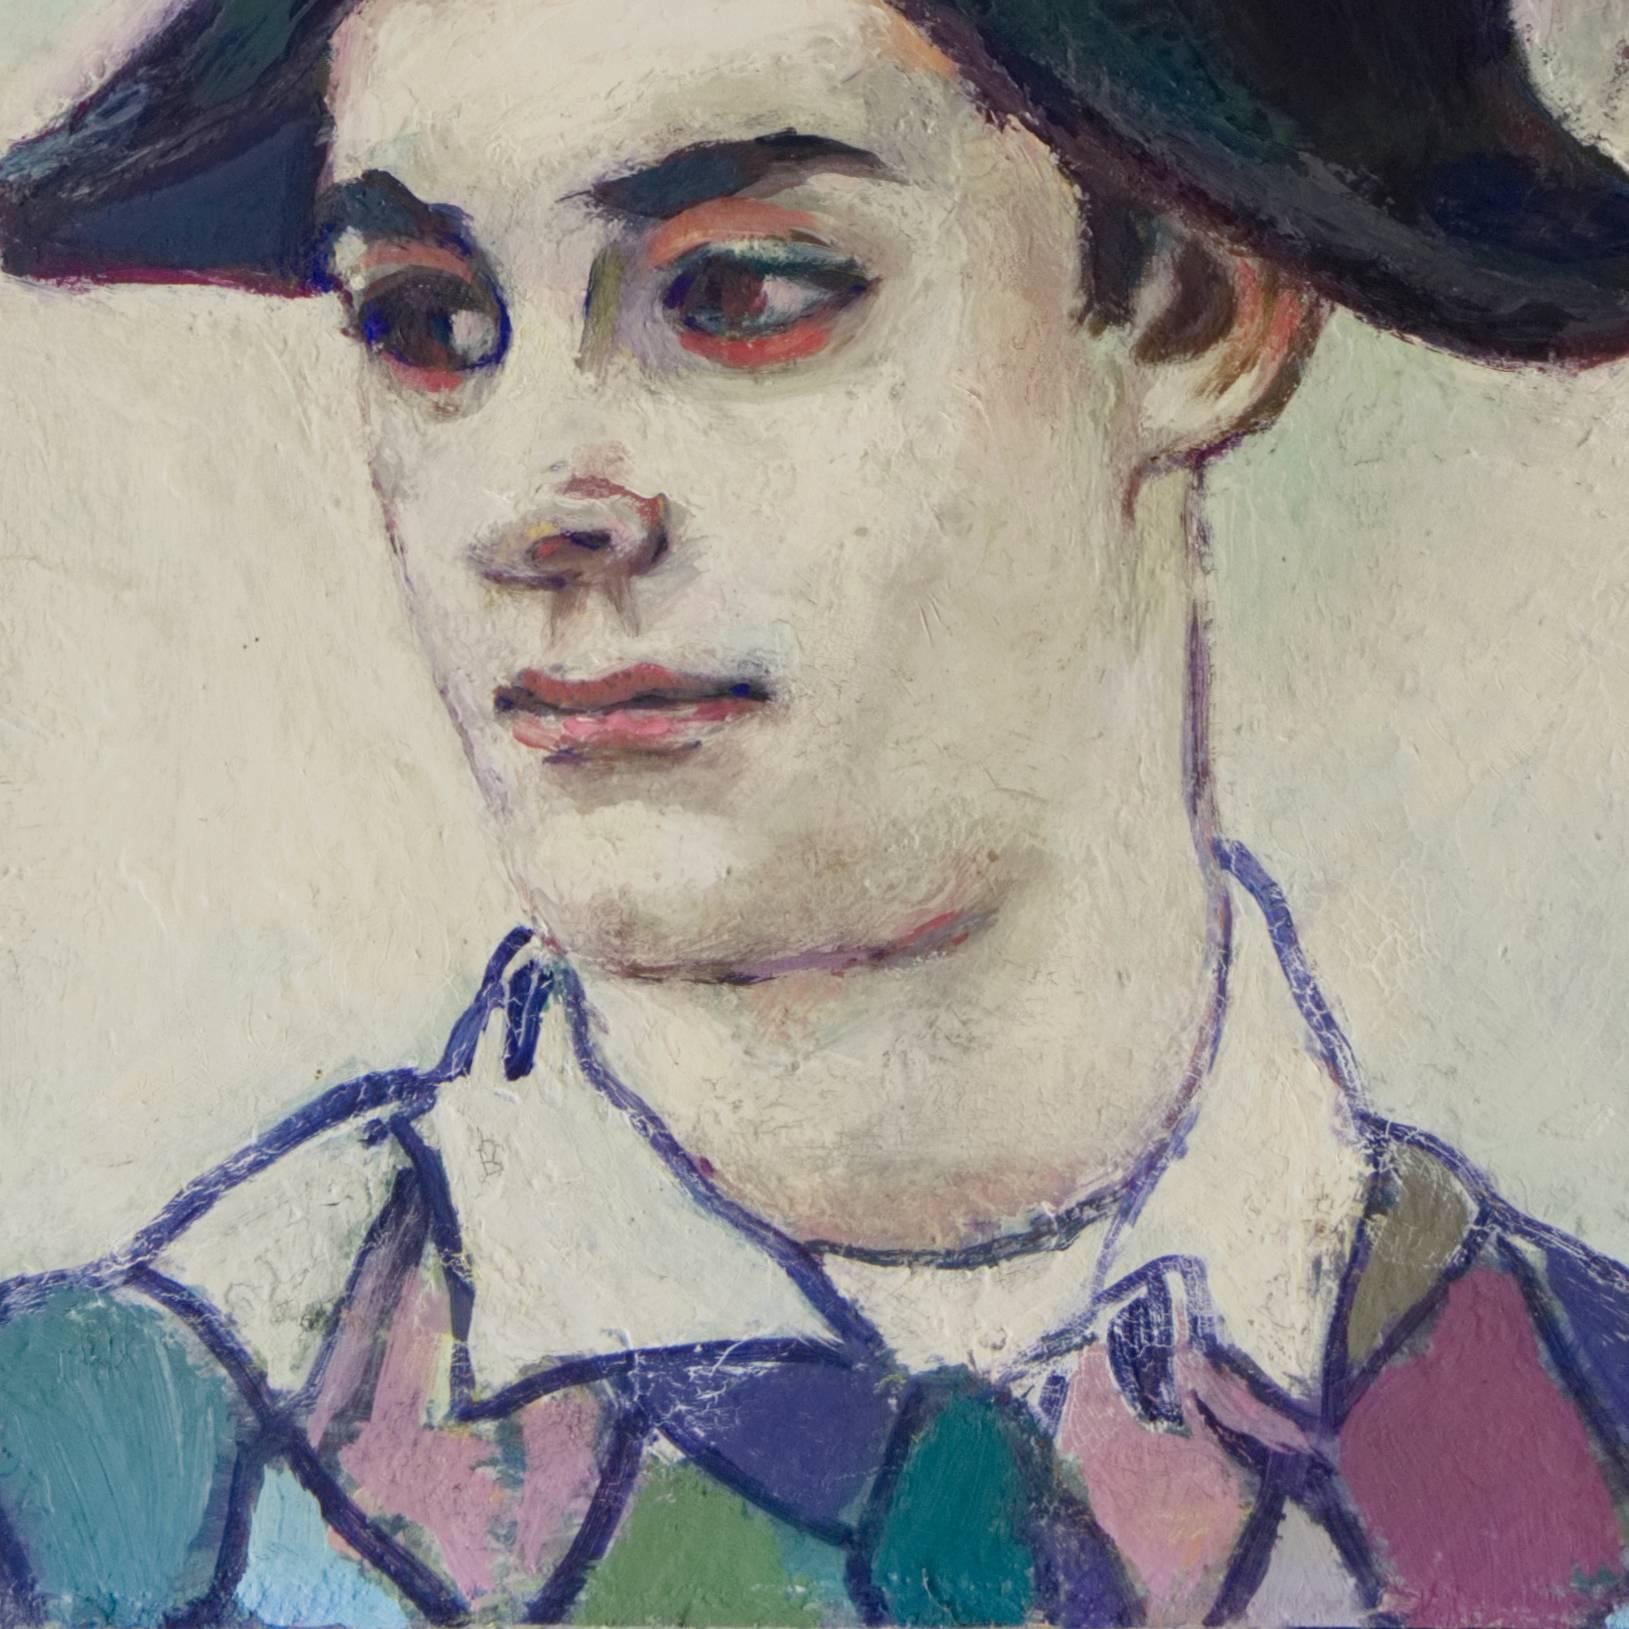 American School, unsigned and painted circa 1950.

A dramatic, American school portrait showing a young man dressed as Harlequin and gazing contemplatively away from the viewer. The subject's striking features and multicolored costume contrast